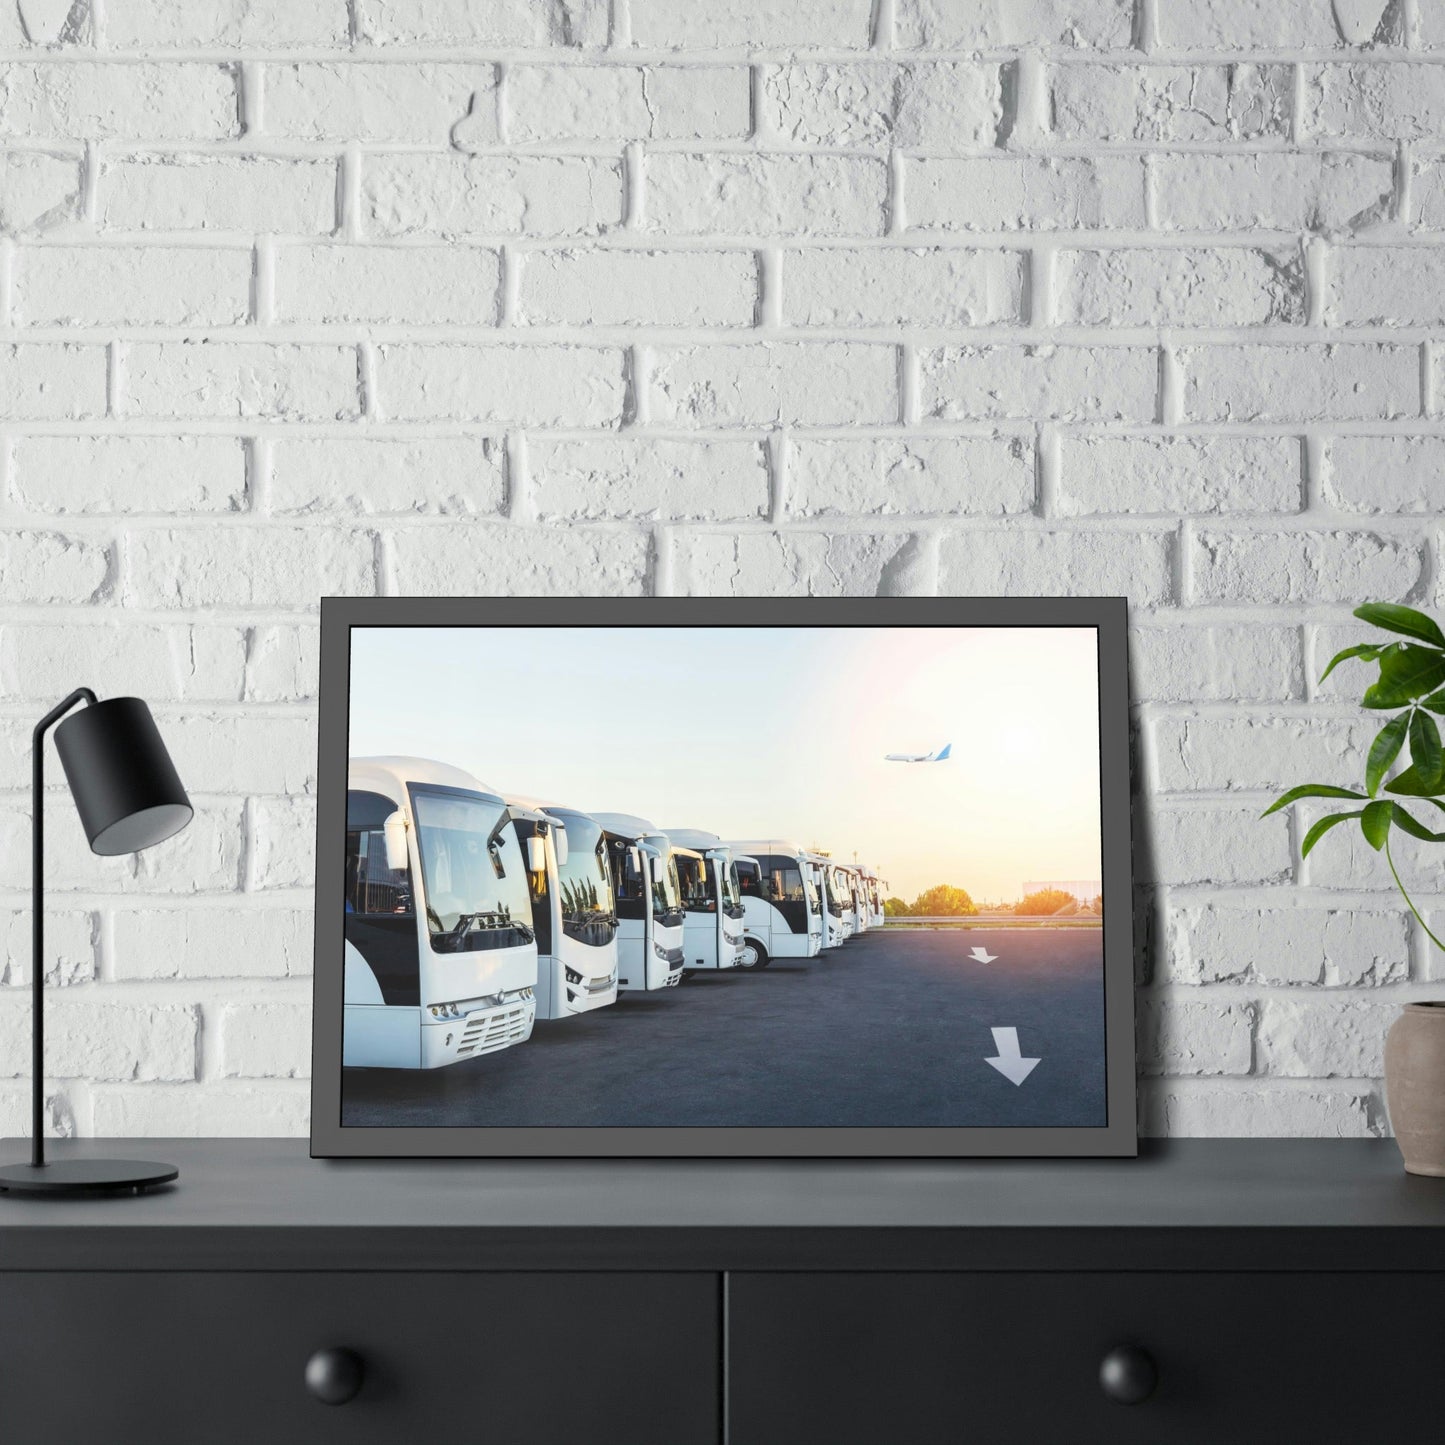 Endless Adventure: Bus Framed Canvas for Travel Enthusiasts